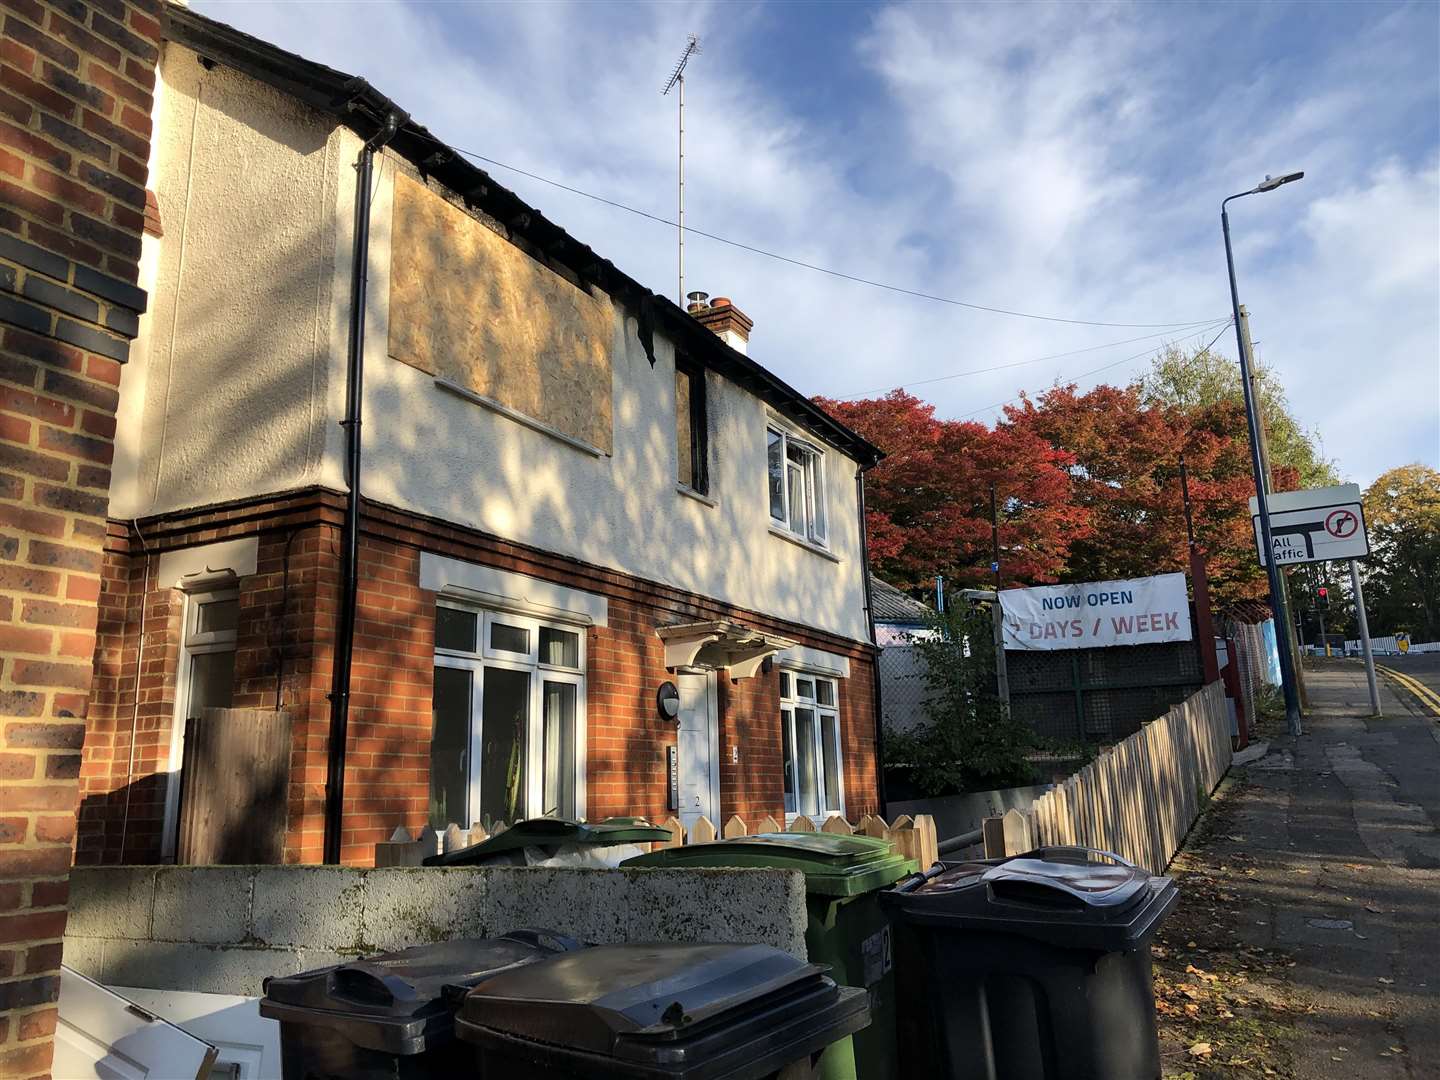 The house in Square Hill was on fire in the early hours of Thursday morning